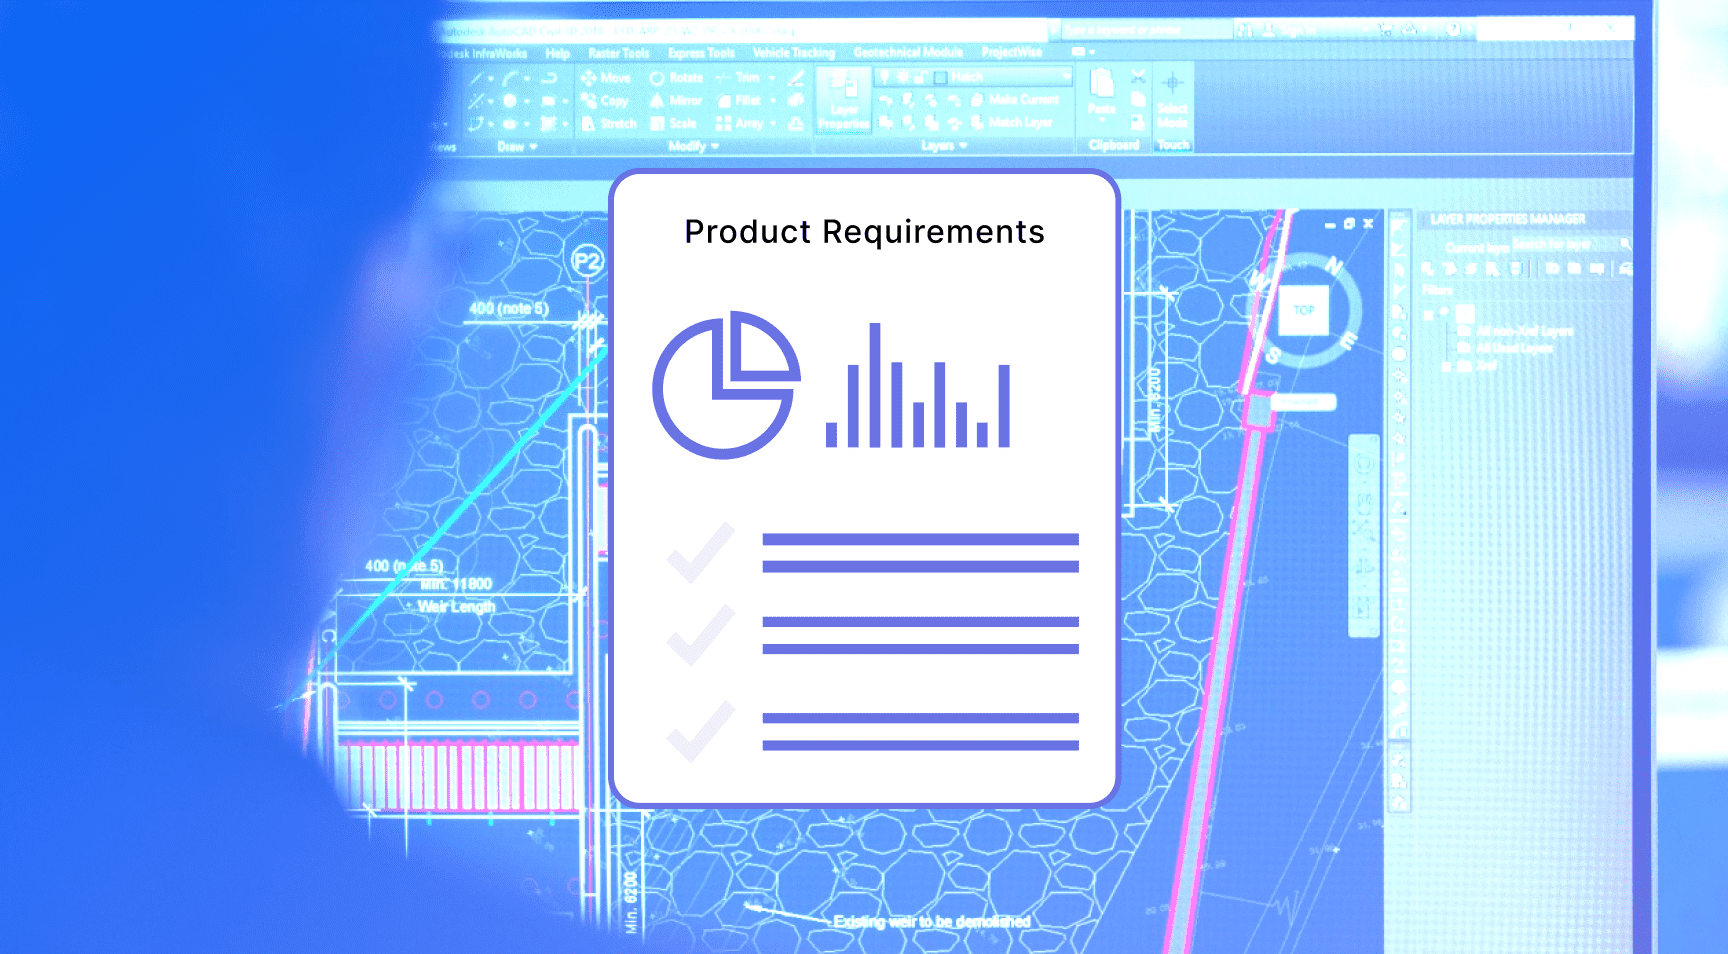 A chart outlining product requirements